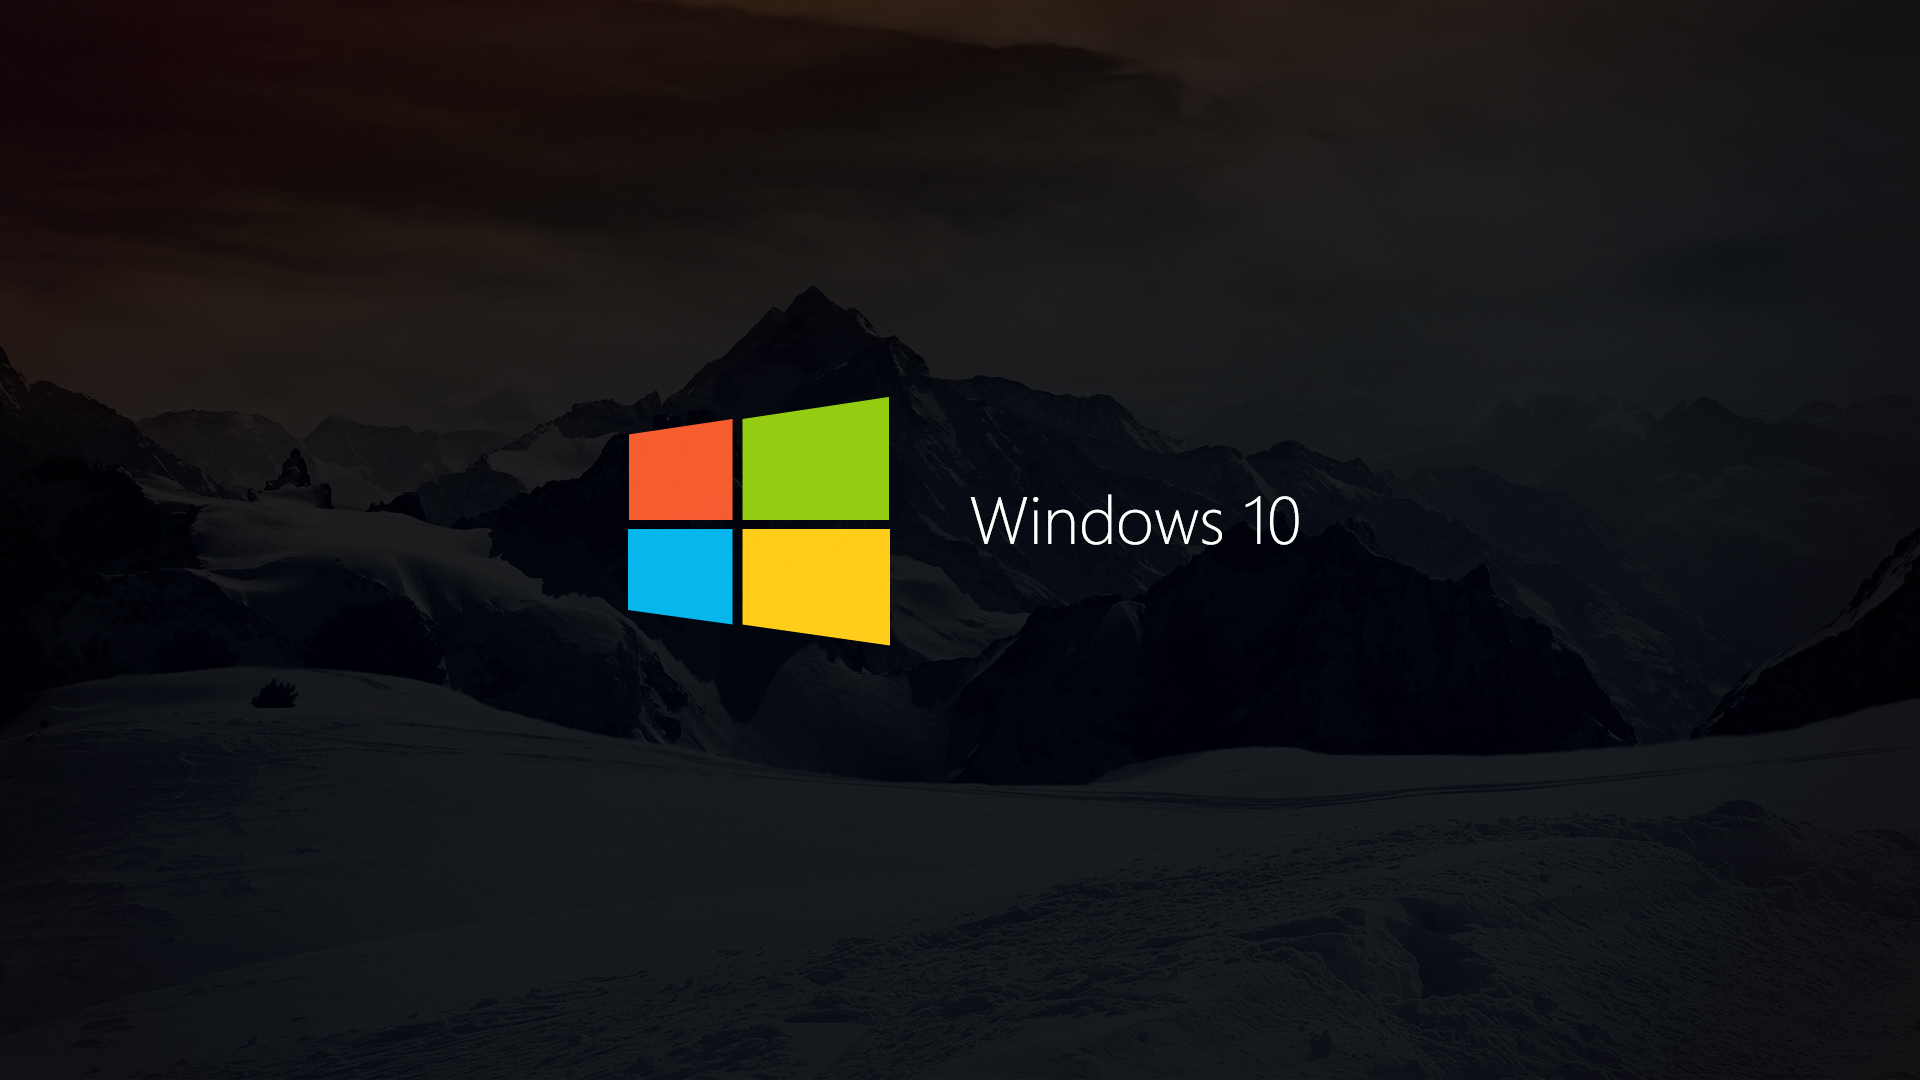 Windows 10 Themed Wallpaper 1920x1080 by Kothanos on